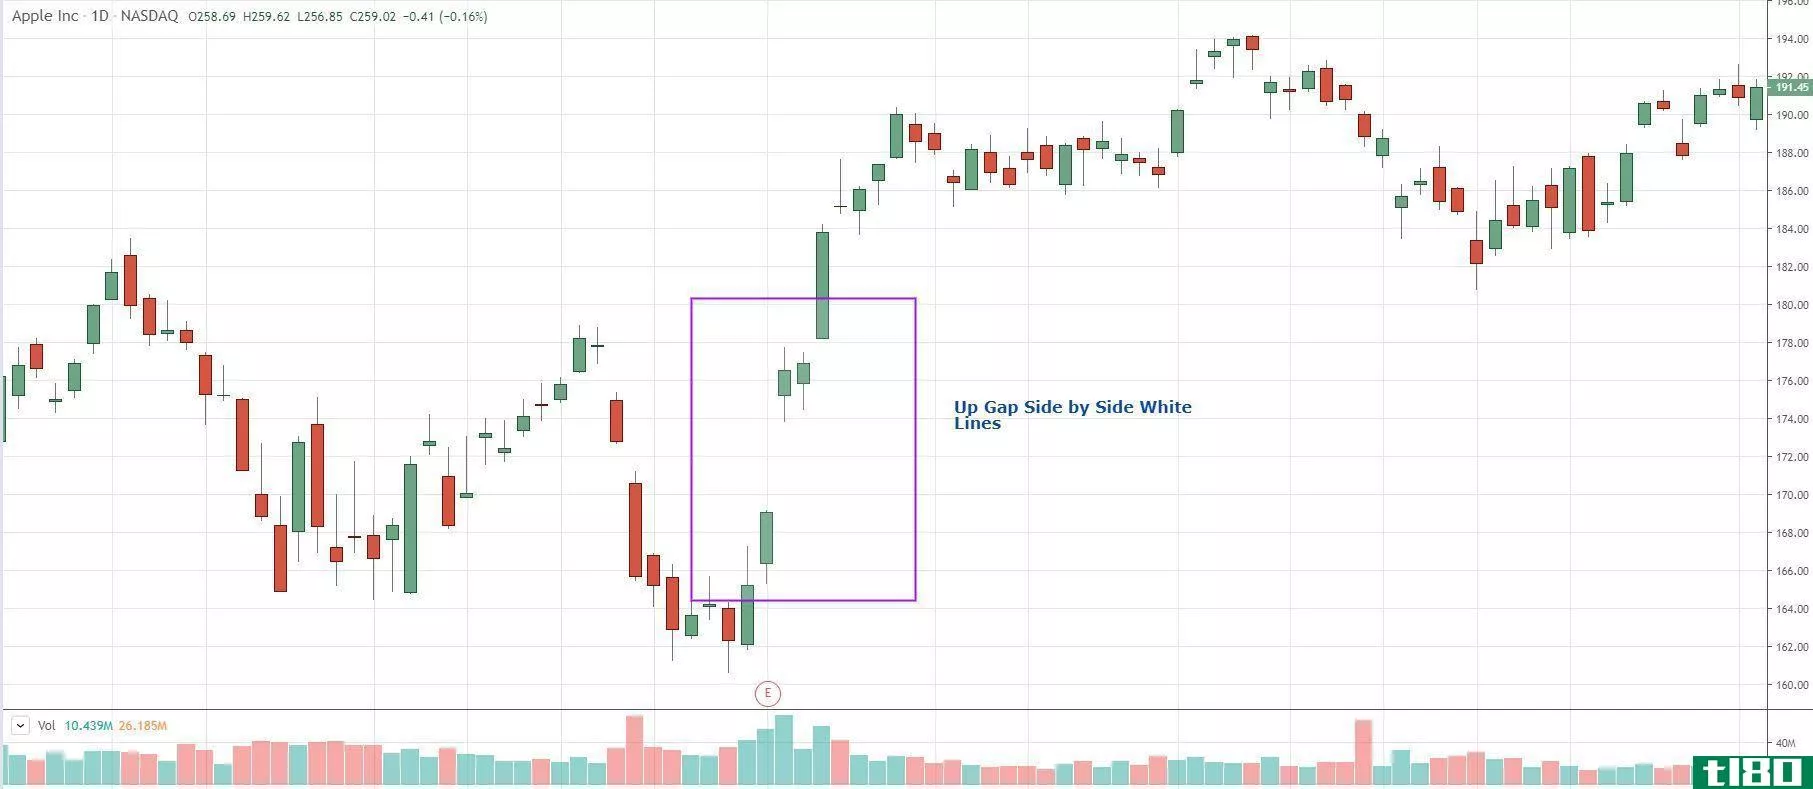 up gap side by side white lines daily stock chart example